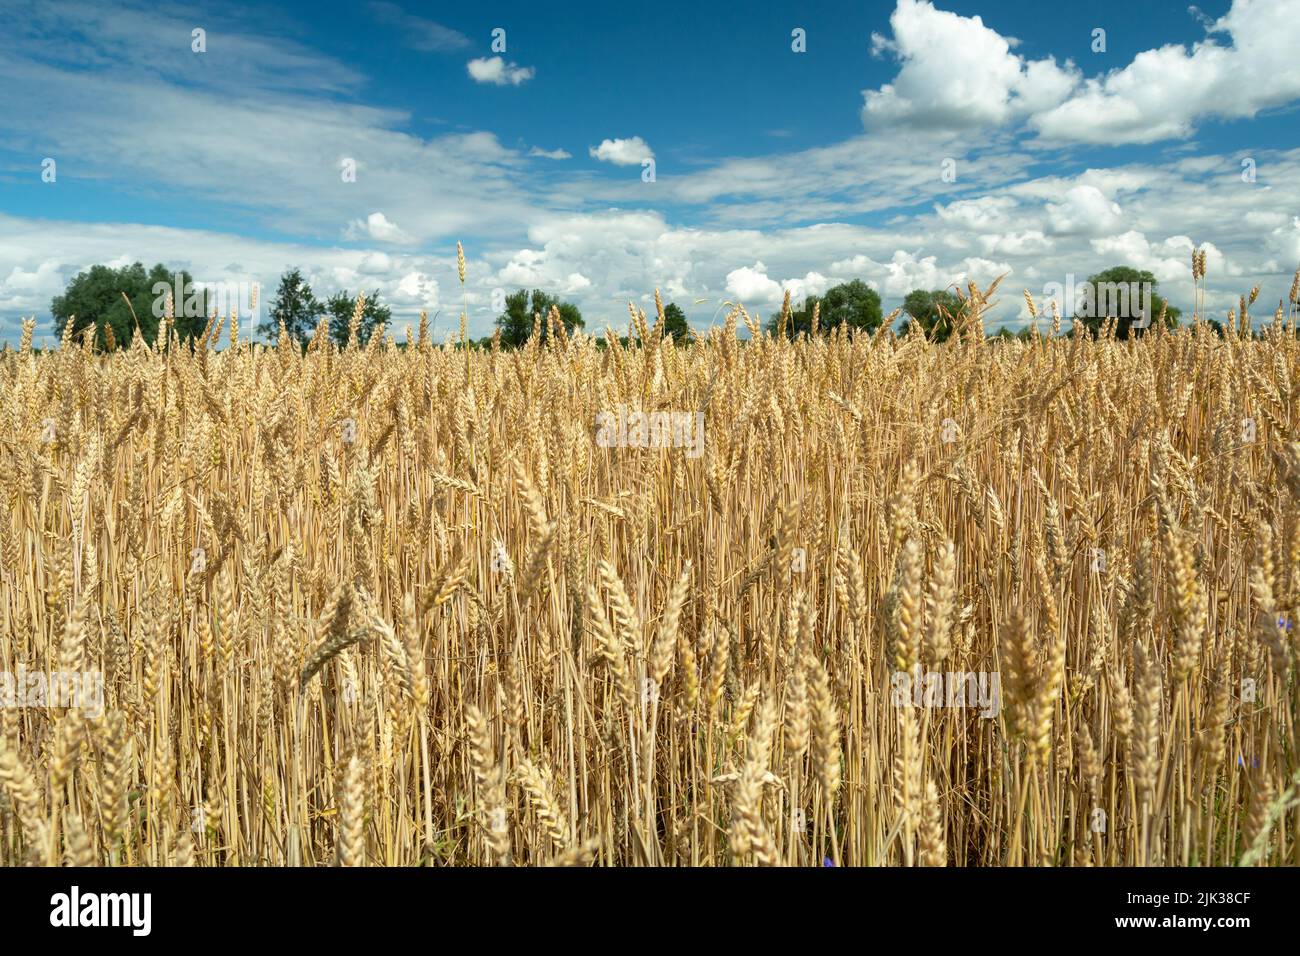 Golden wheat field and white clouds in the sky Stock Photo